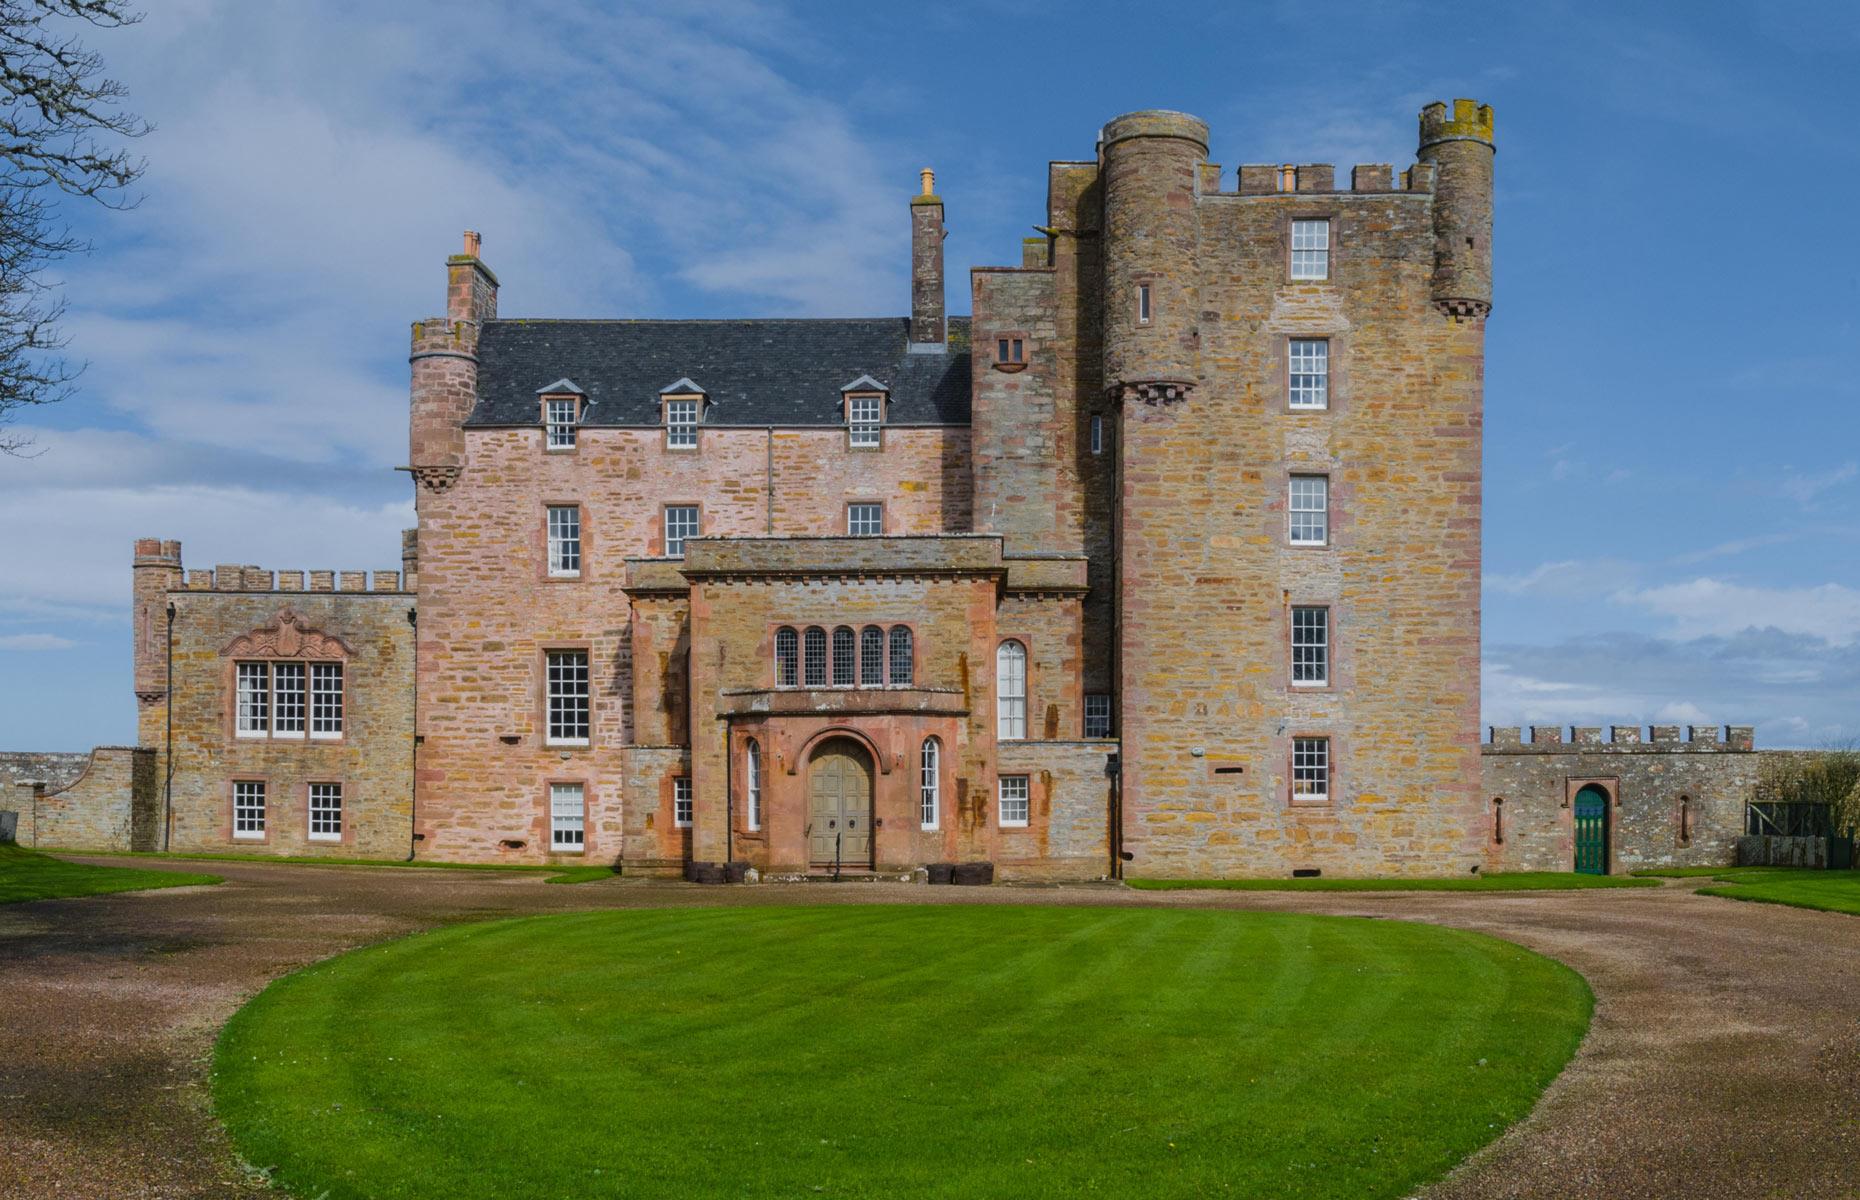 <p>The remote and windswept <a href="https://www.castleofmey.org.uk/">Castle of Mey</a> near John O’Groats in Caithness was a beloved summer home of the late Queen Mother up until her death in 2002.</p>  <p>Built between 1566 and 1572 for the 4th Earl of Caithness, the castle was purchased by the Queen Mother in 1952 following the death of her husband King George Vl. Now owned by the Castle of Mey Trust, it is regularly open to the public. </p>